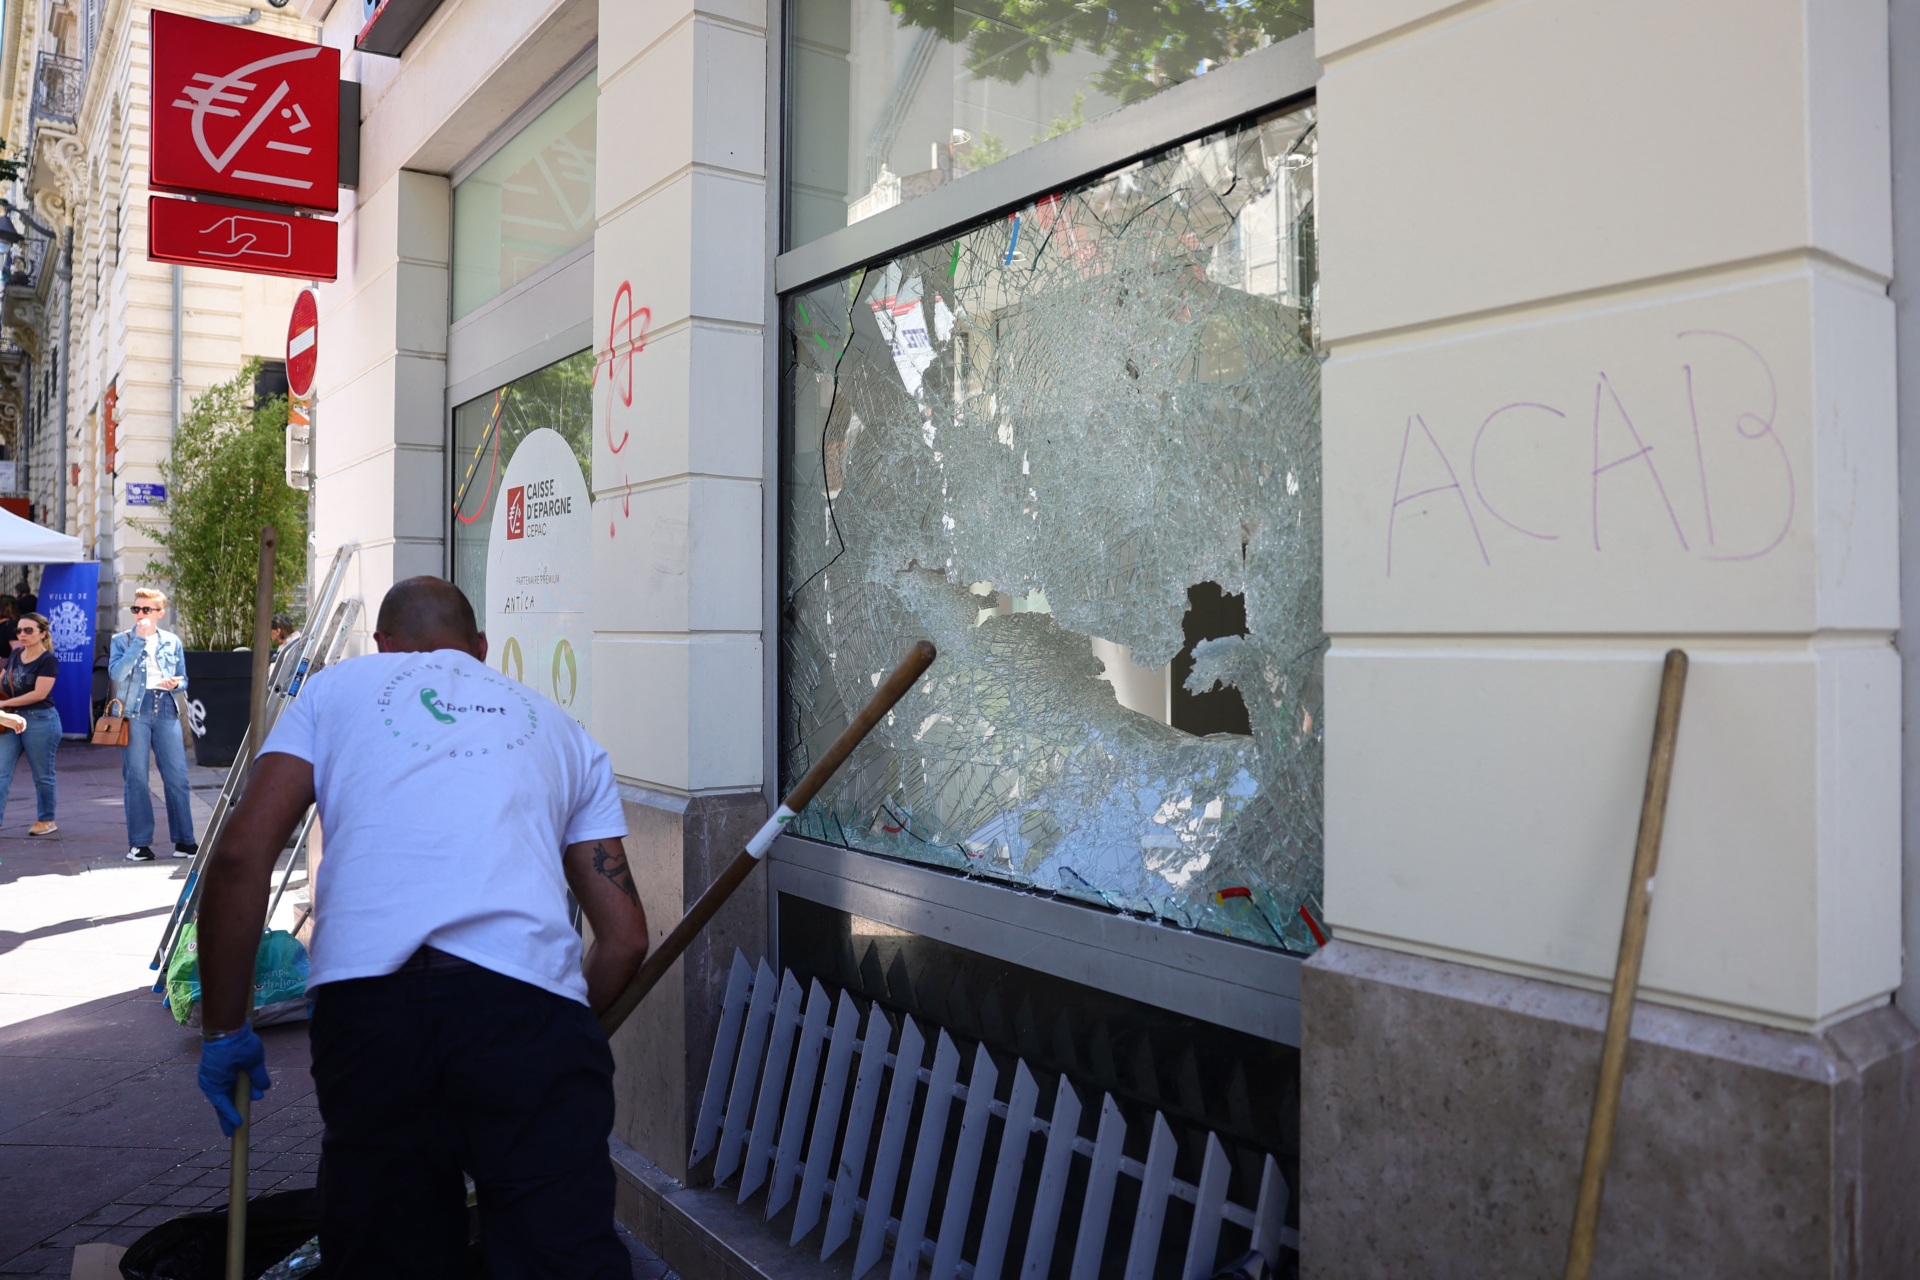 A cleaning contractor cleans debris next to a damaged window of a Caisse d'Epargne bank in the centre of Marseille, southern France on July 1, 2023, after a fourth consecutive night of rioting in France over the killing of a teenager by police. French police arrested 994 people nationwide during a fourth consecutive night of rioting over the killing of a teenager by police, the interior ministry said on July 1, 2023. France had deployed 45,000 officers overnight backed by light armoured vehicles and crack police units to quell the violence over the death of 17-year-old Nahel, killed during a traffic stop in a Paris suburb on June 27, 2023. (Photo by CLEMENT MAHOUDEAU / AFP) (Photo by CLEMENT MAHOUDEAU/AFP via Getty Images)